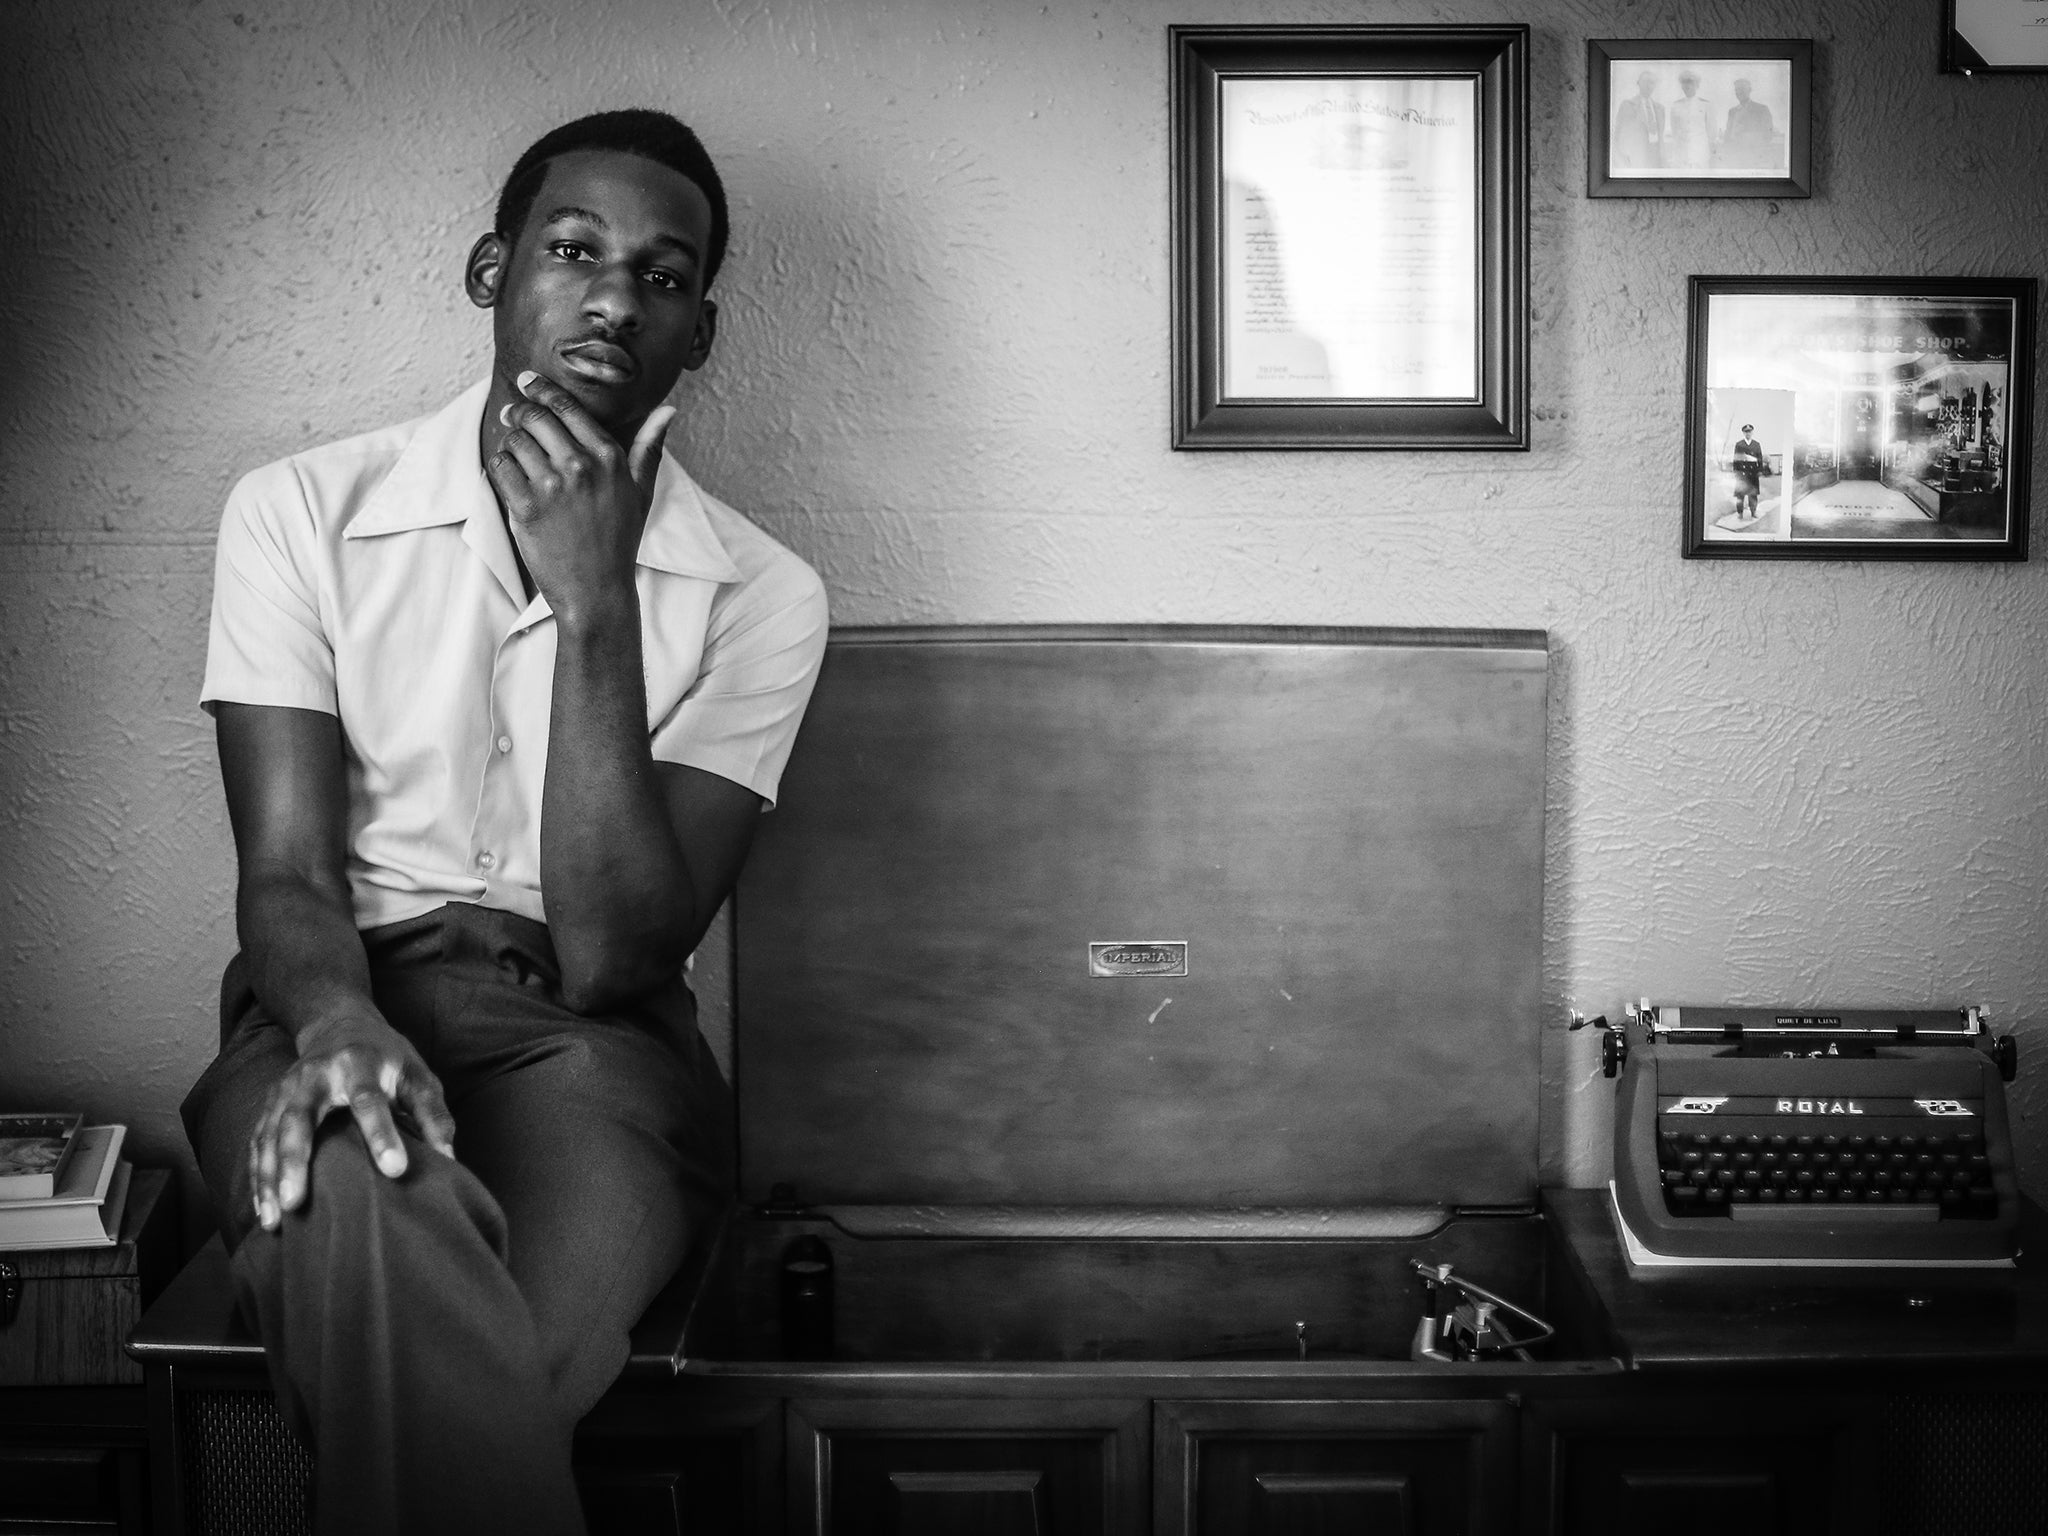 Leon Bridges was not allowed to listen to “secular” music